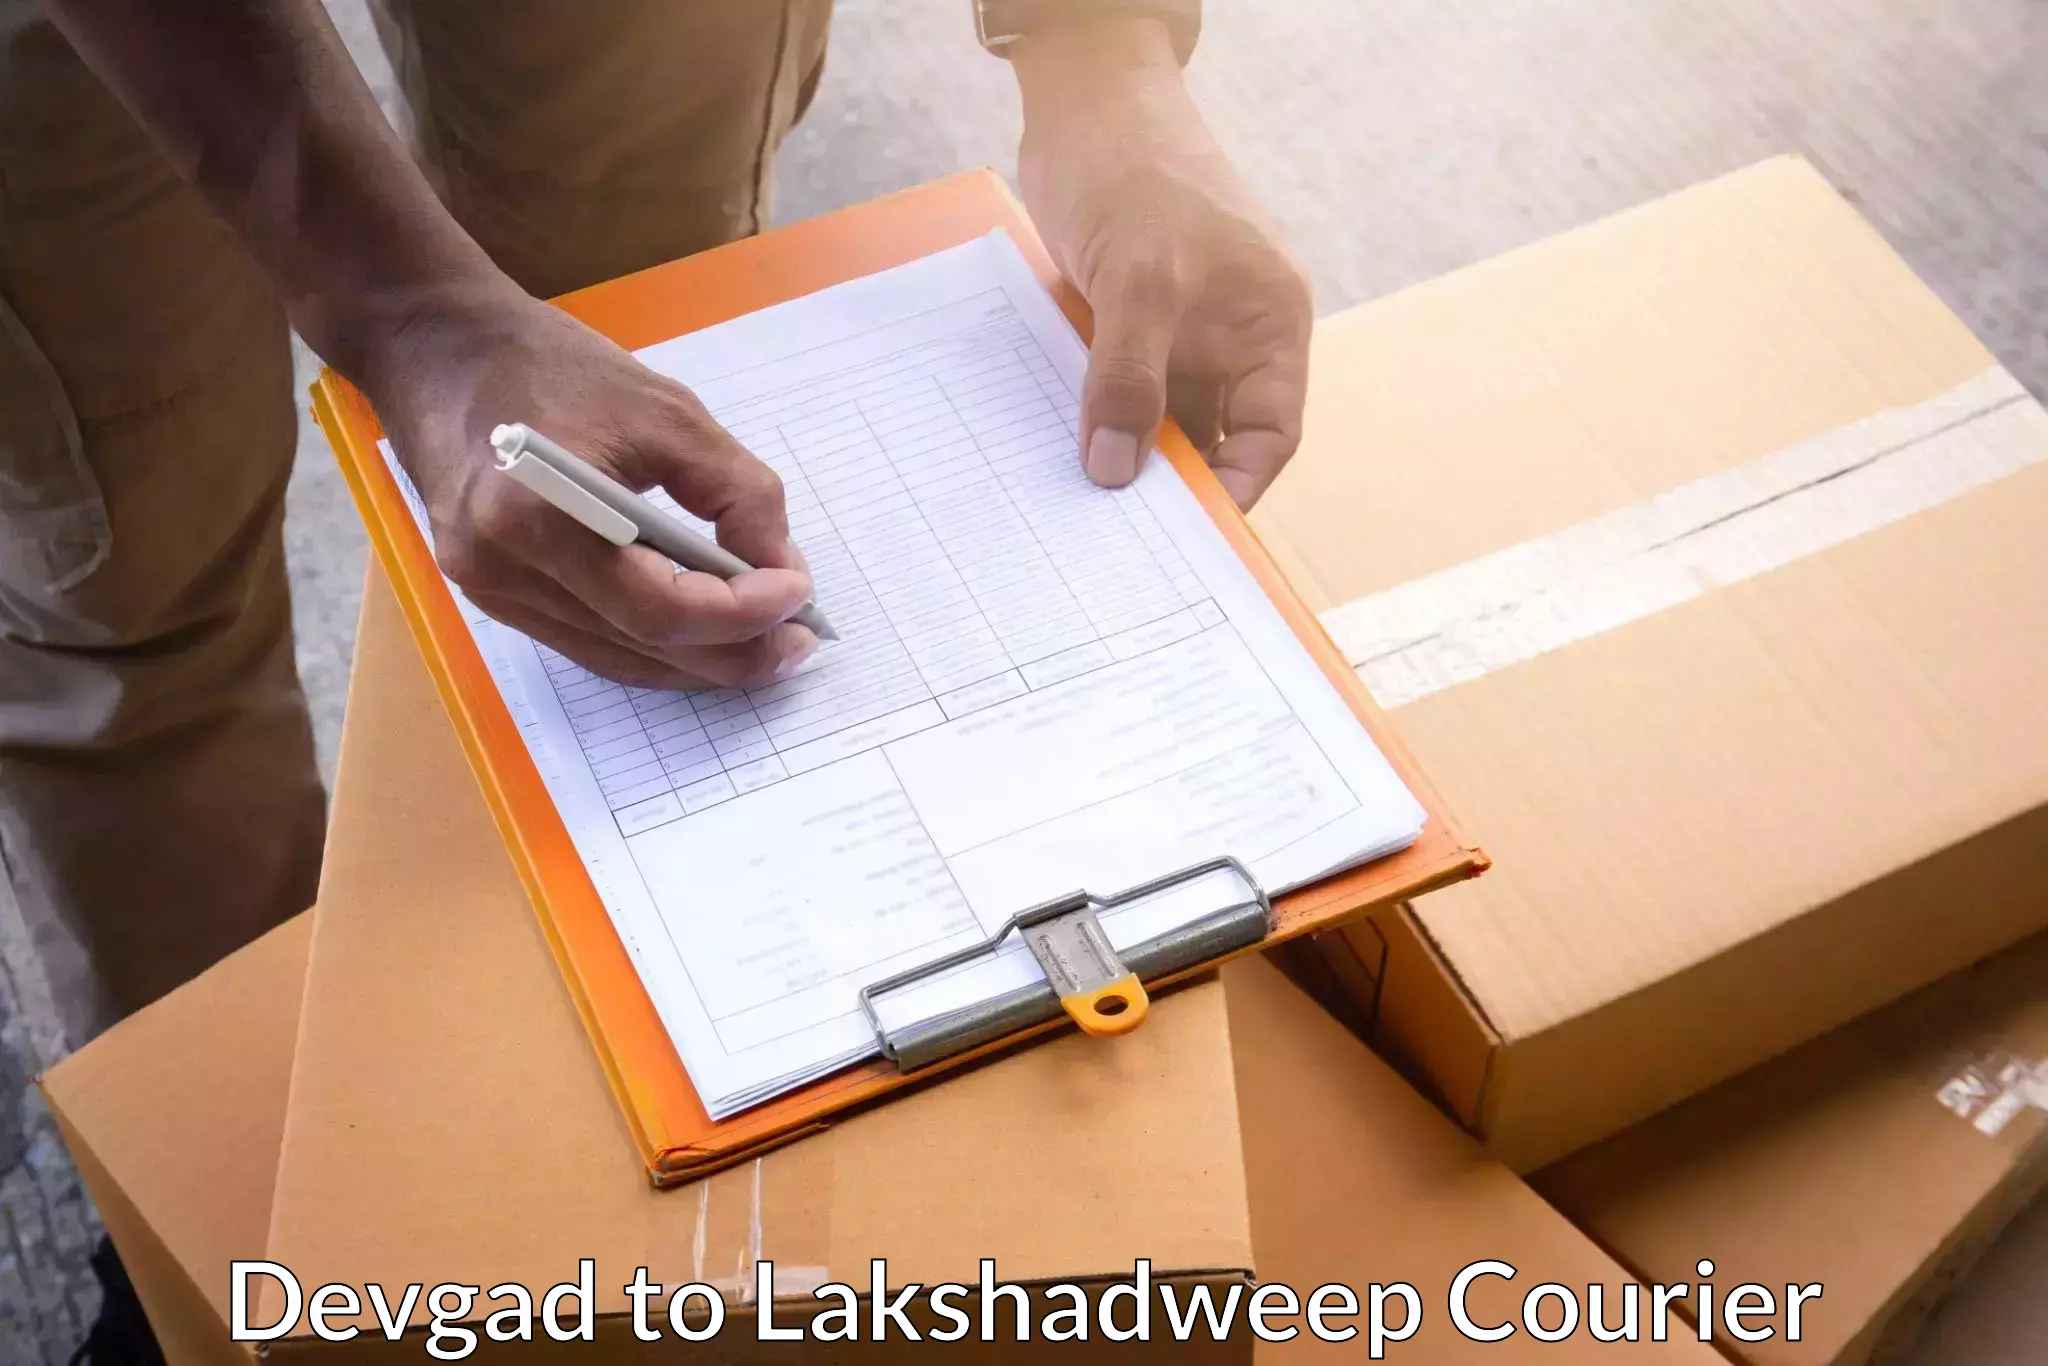 On-call courier service Devgad to Lakshadweep